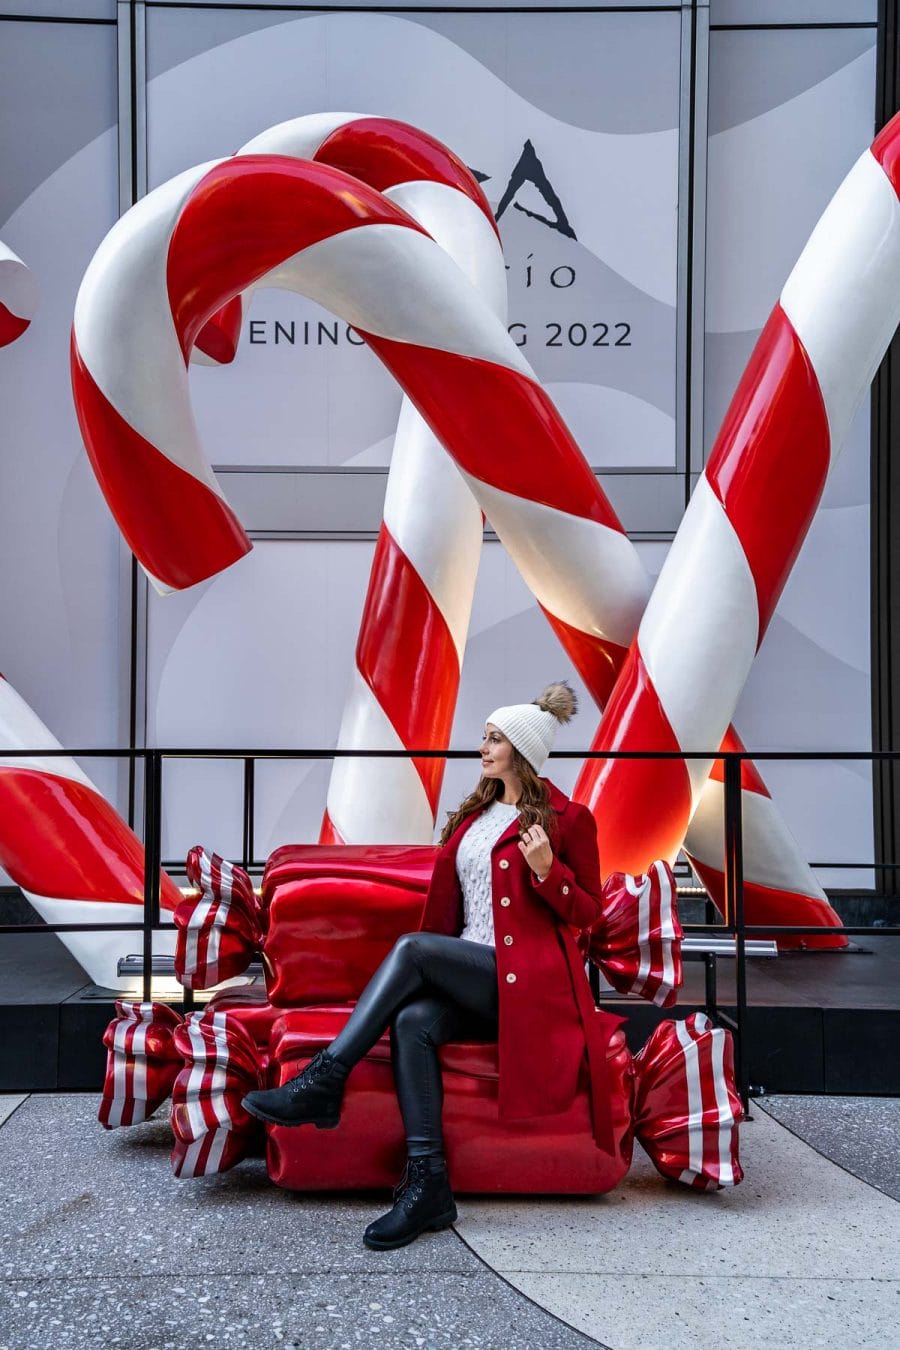 Candy Canes on Sixth Avenue in New York